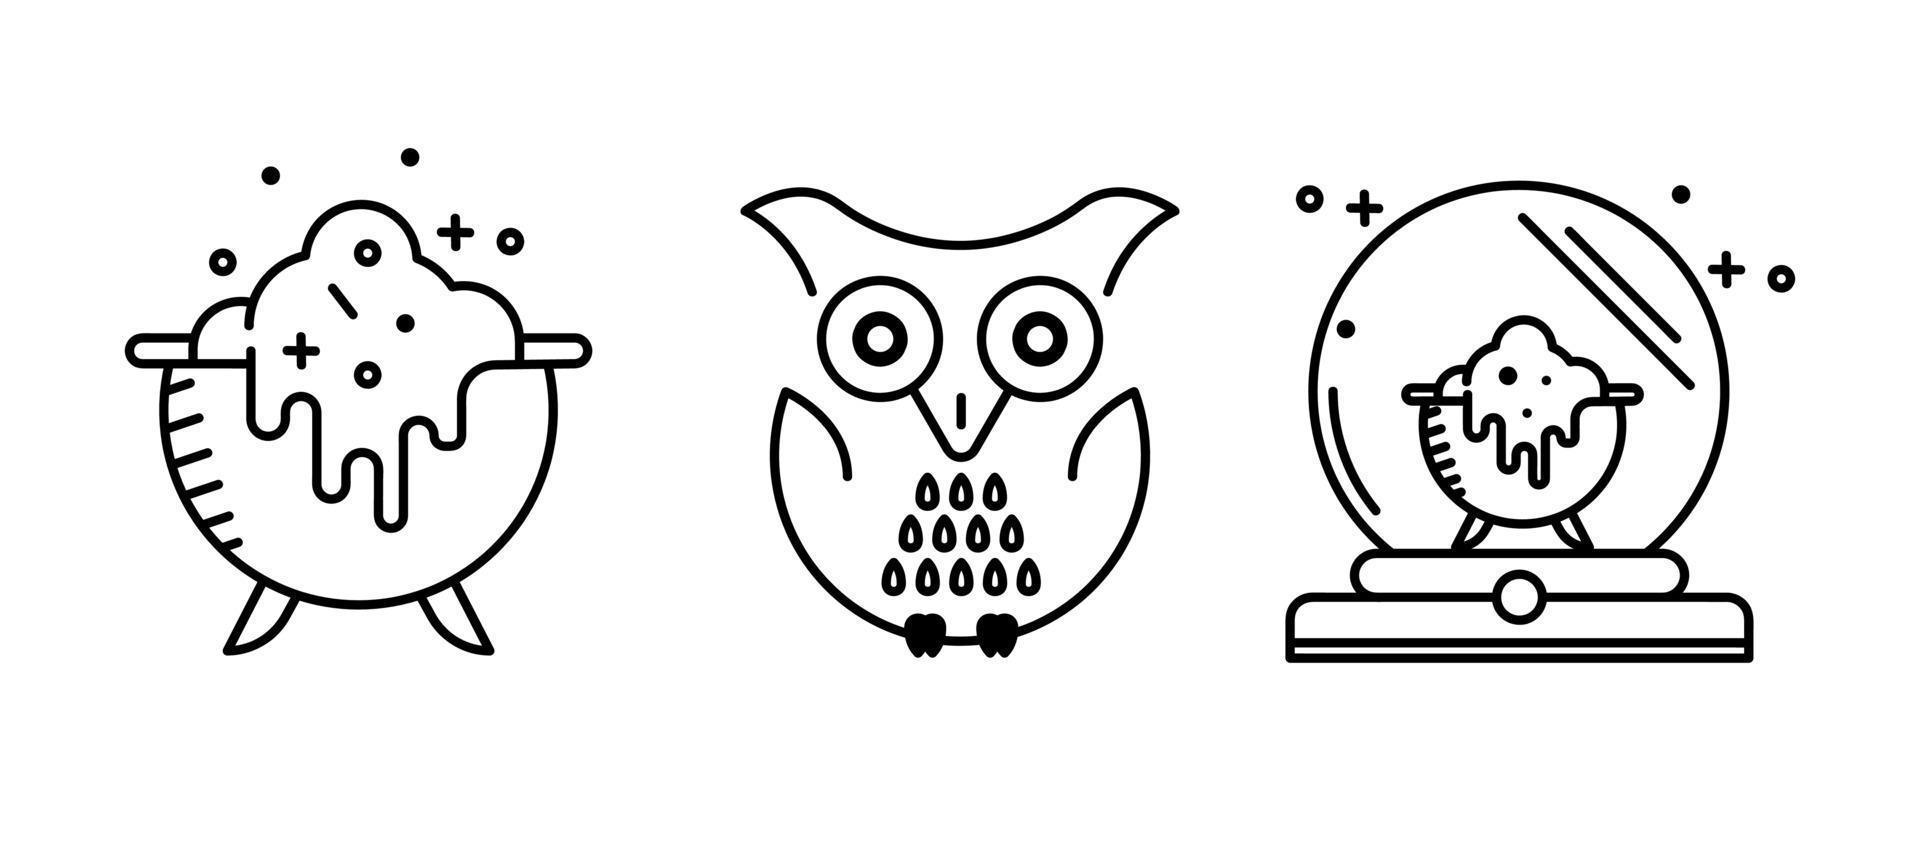 Win in magic cauldron, magic cauldron, orb, owl and magic orb. icons. Set for Halloween concept. It is a set of linear icons. vector